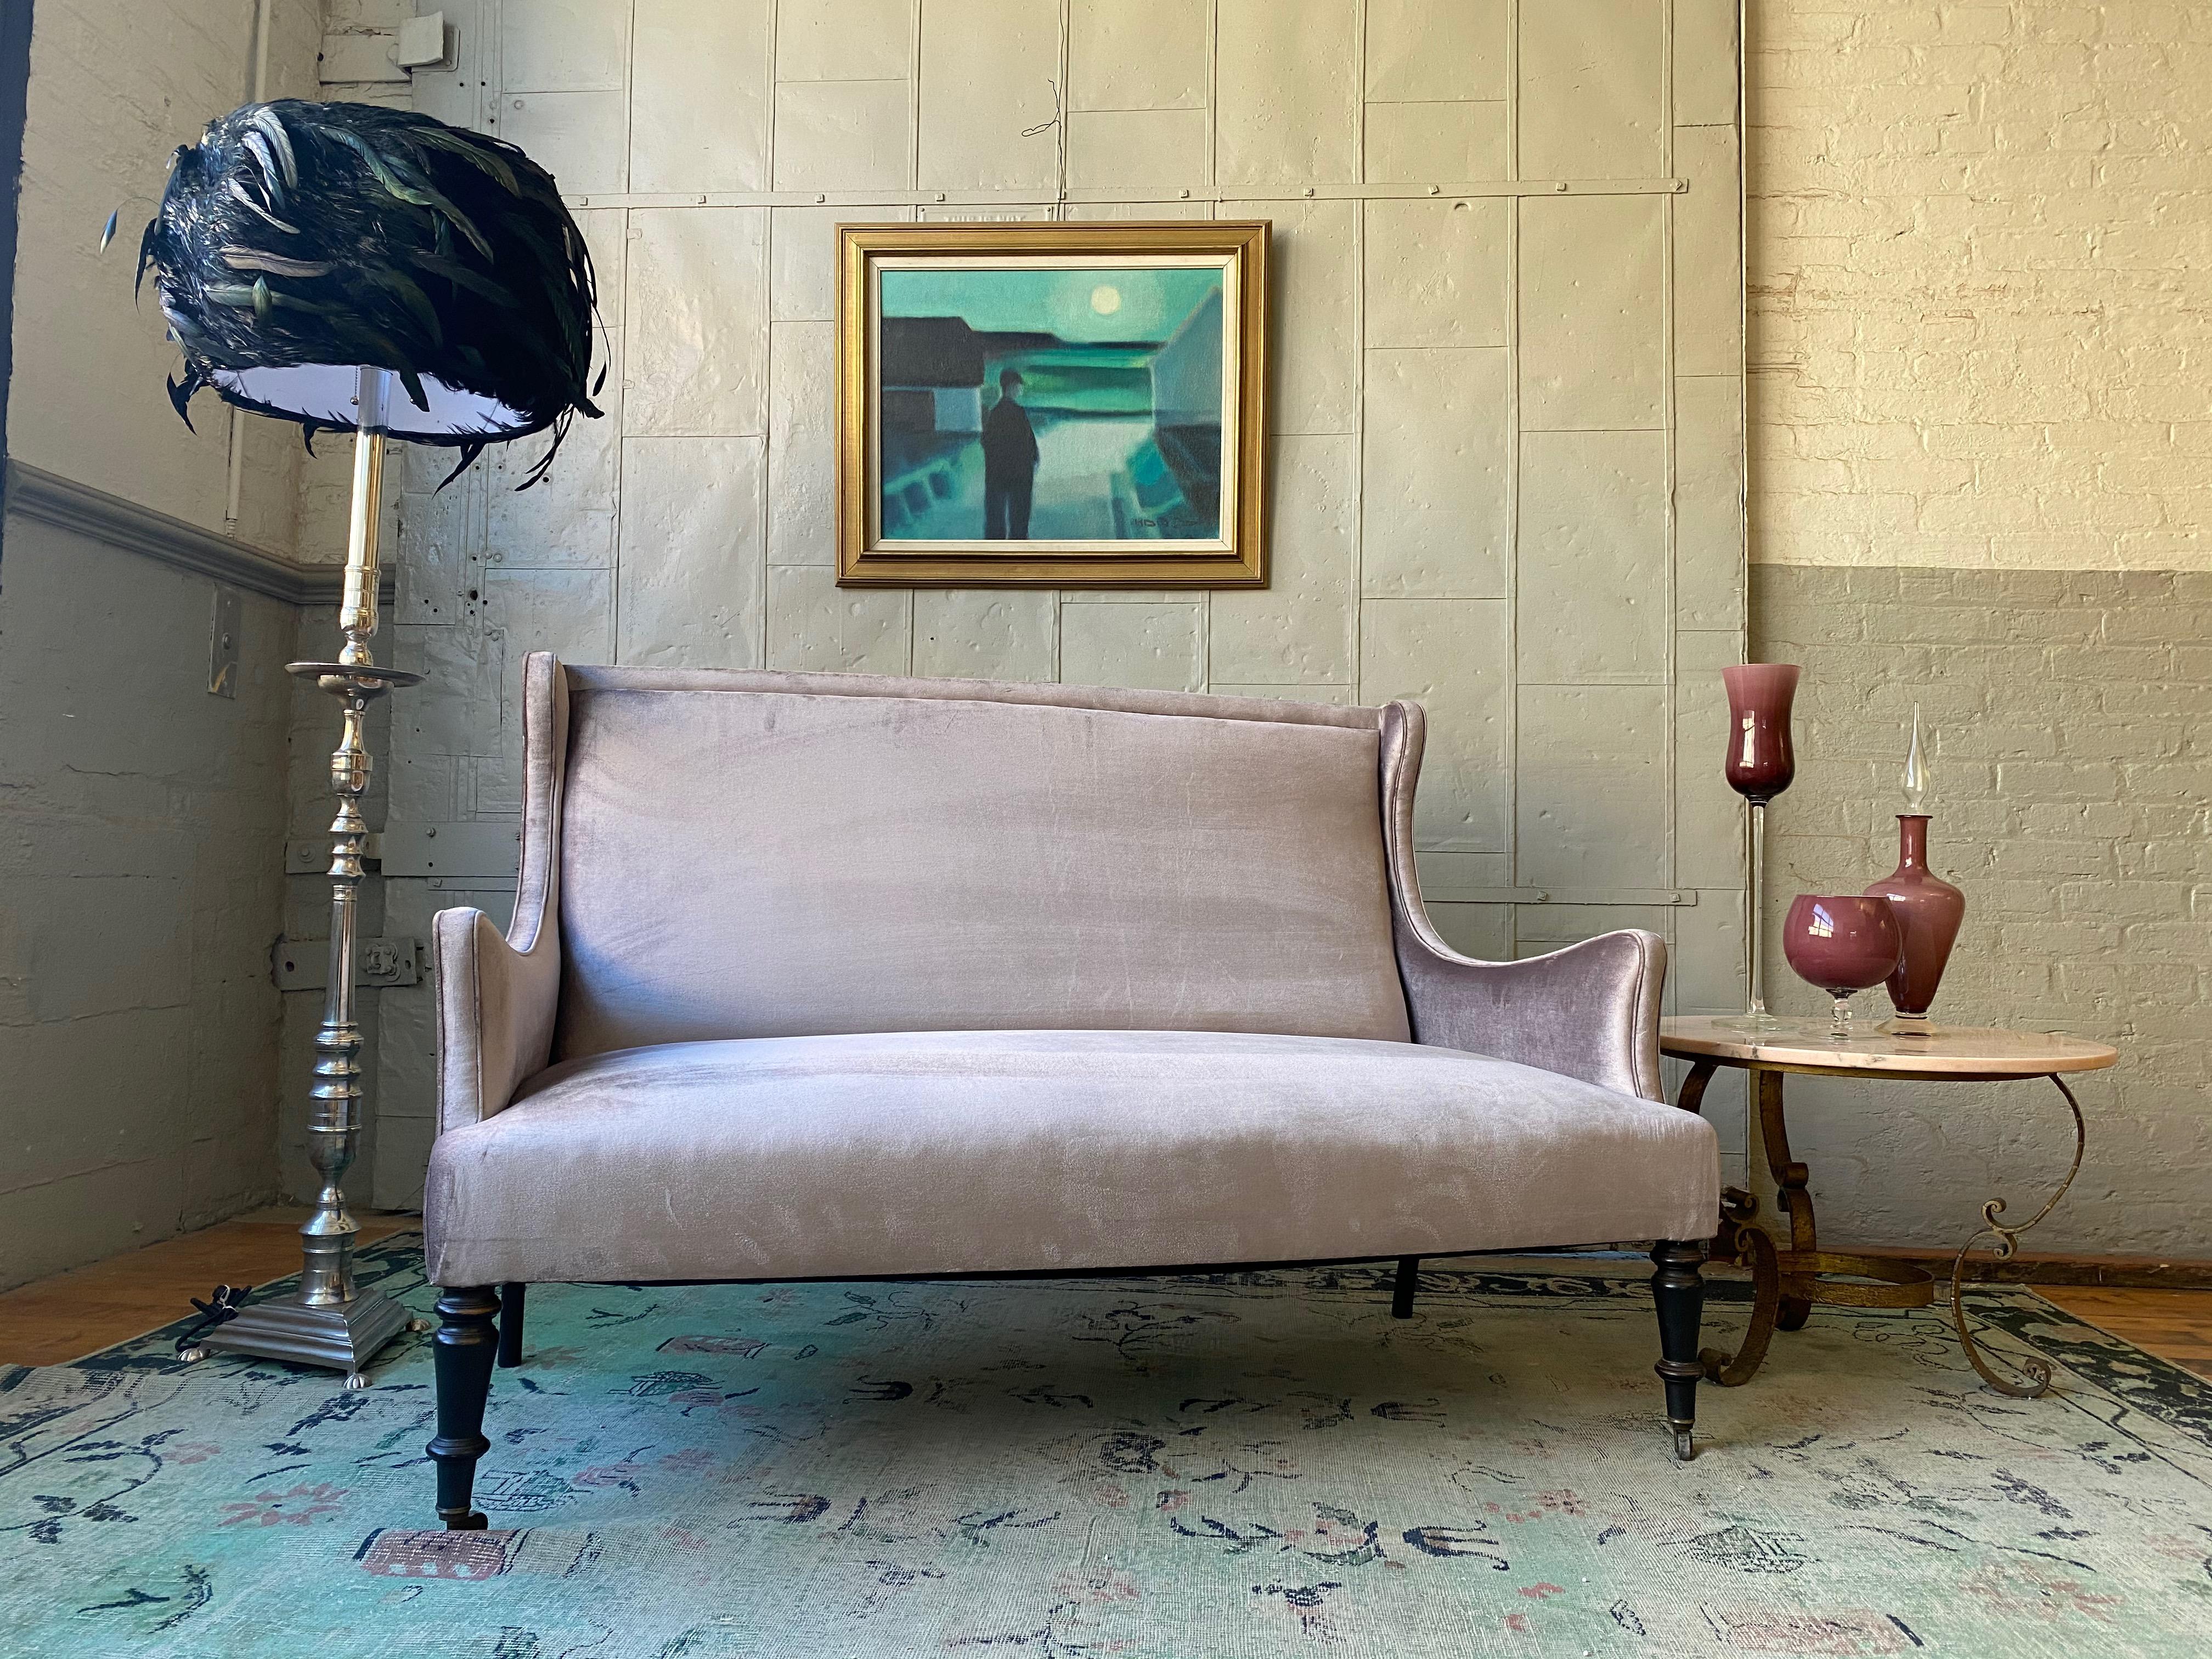 19th century French velvet upholstered settee with turned wood legs. The settee has recently been reupholstered. 

Ref #: SN0215-14 

Dimensions: 37”H x 54”W x 29”D (15”Seat Height)